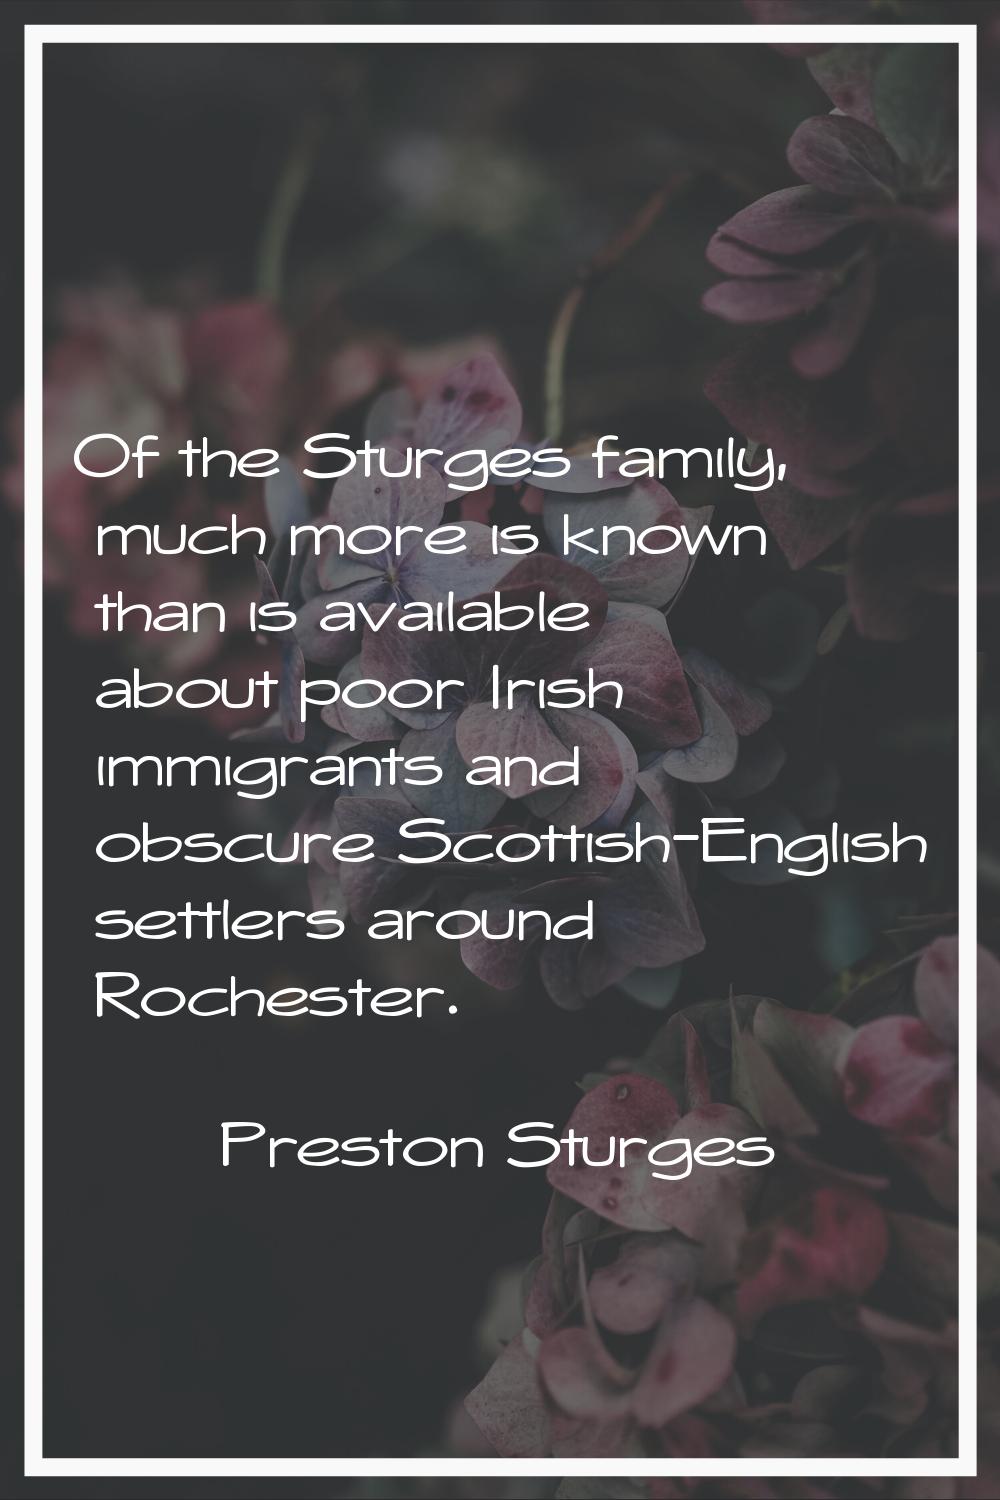 Of the Sturges family, much more is known than is available about poor Irish immigrants and obscure